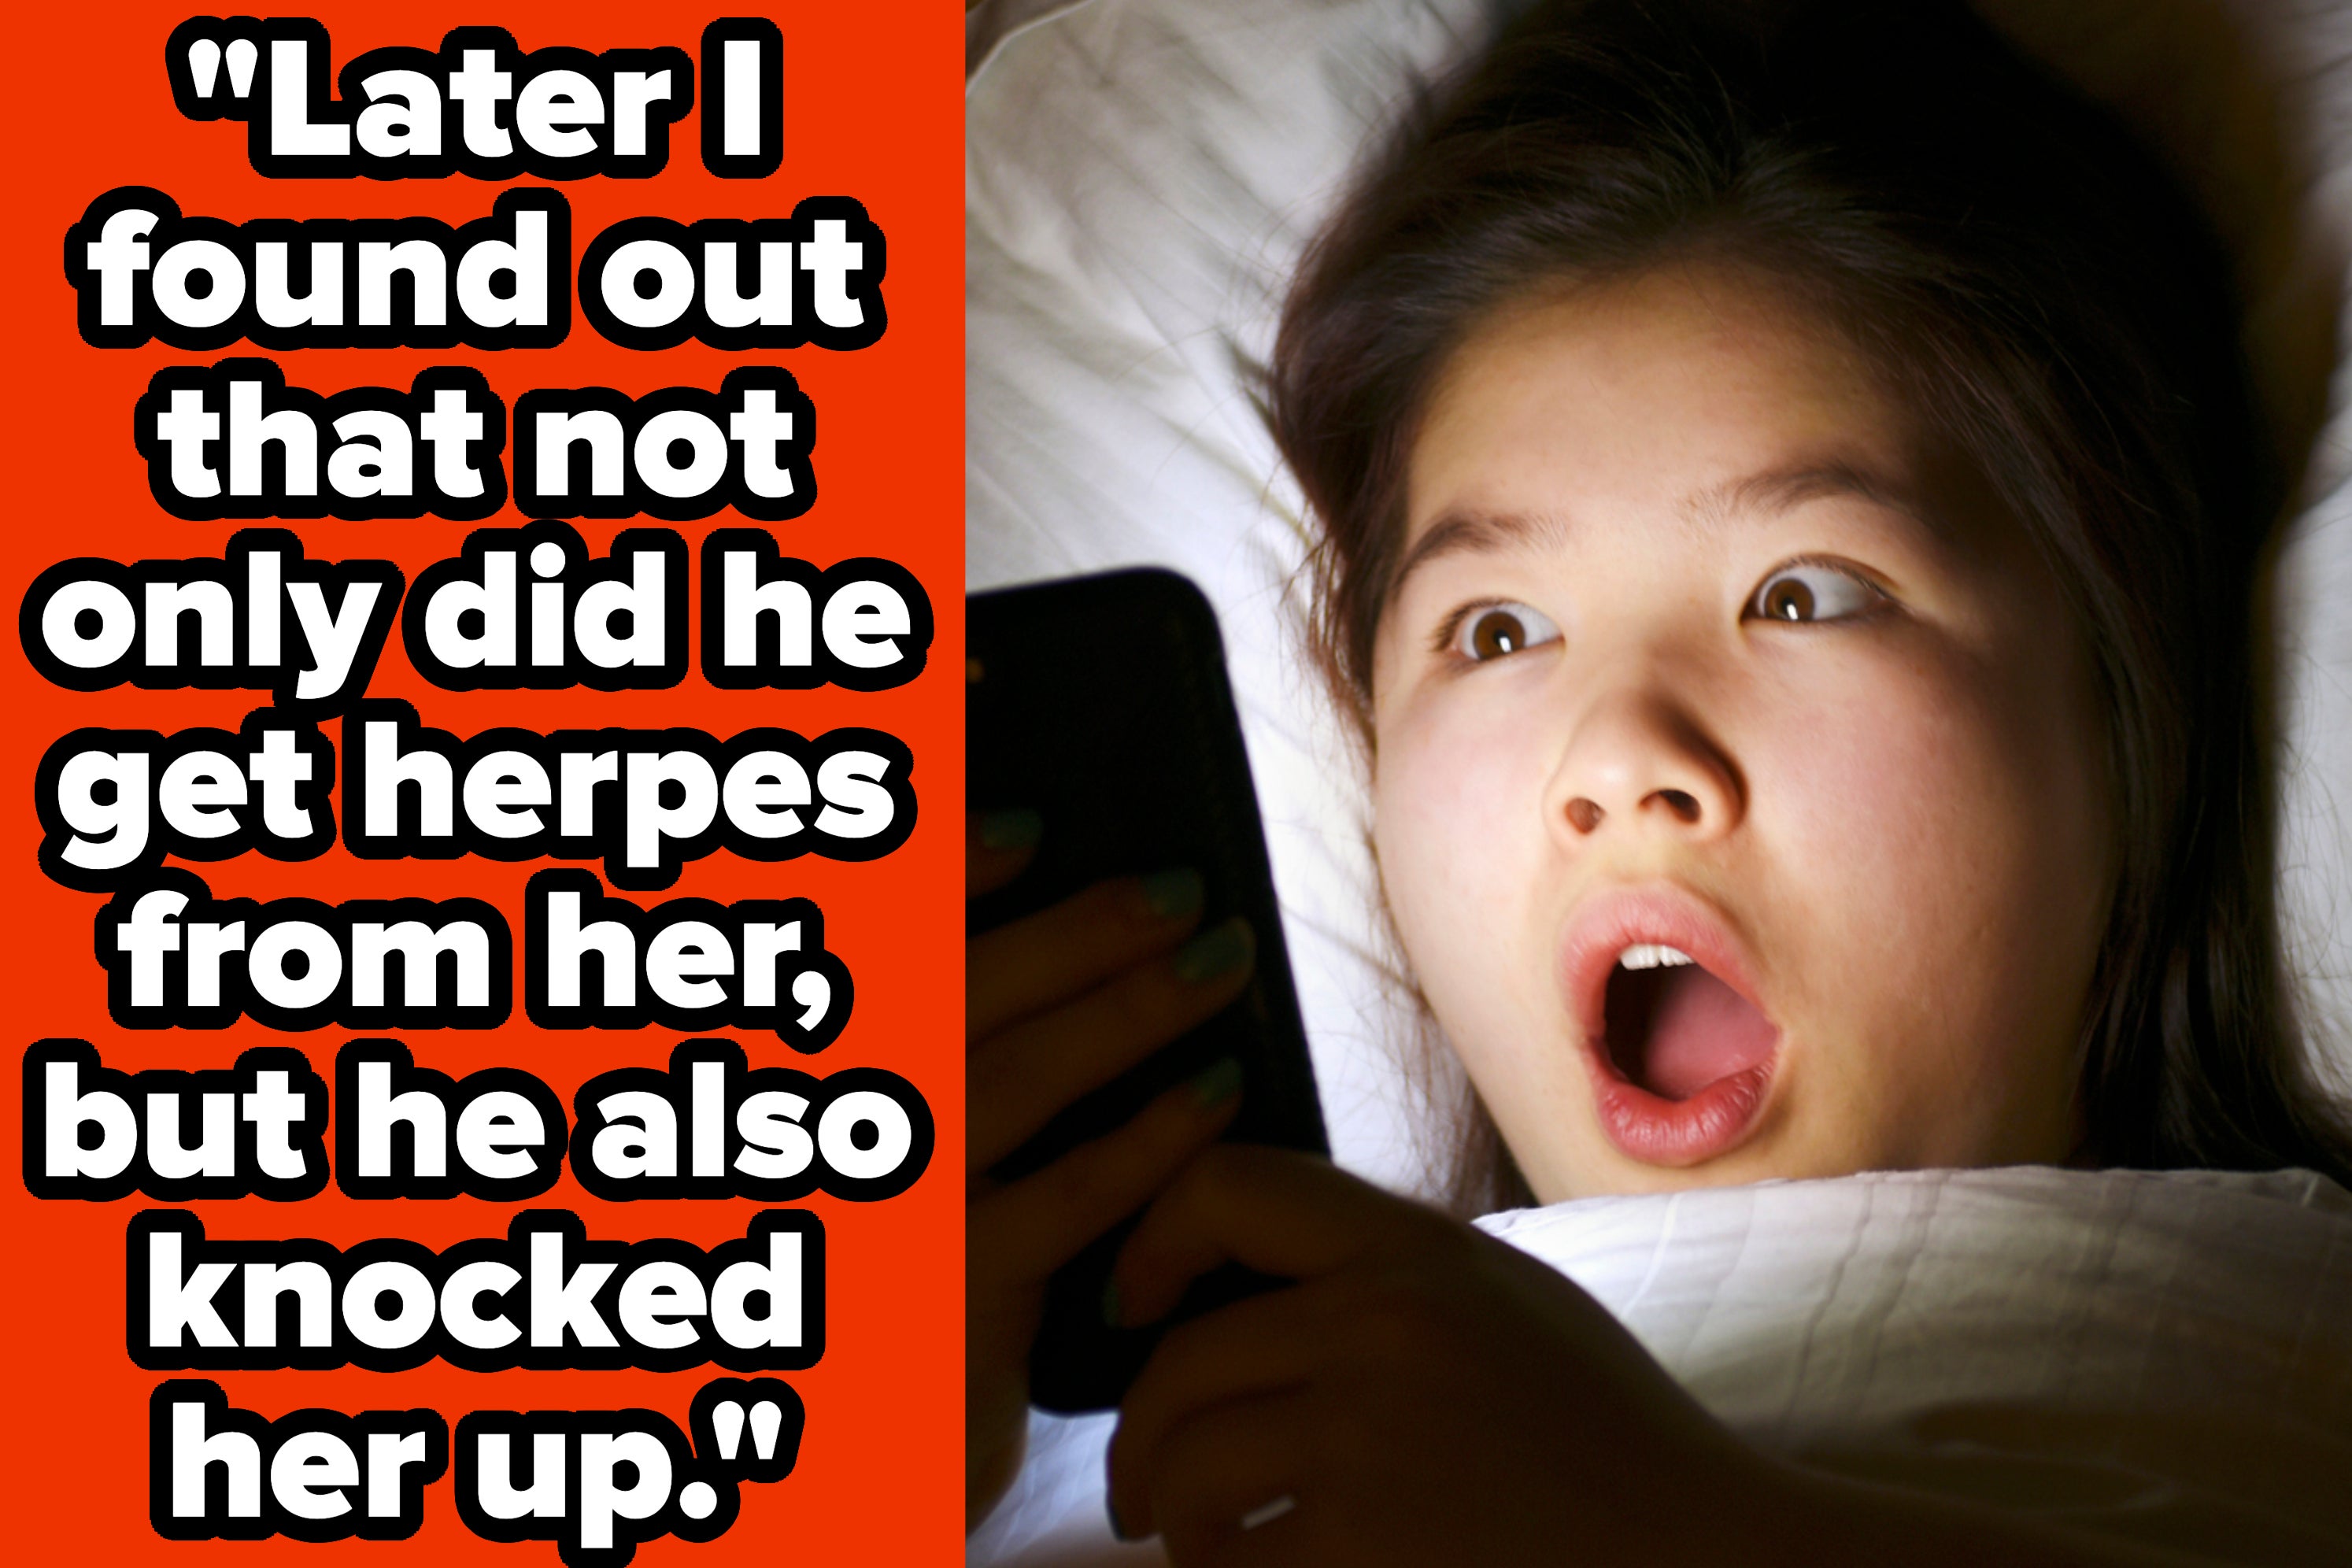 16 Times "Payback" Backfired, And People Ended Up Regretting What They Did To Get Revenge